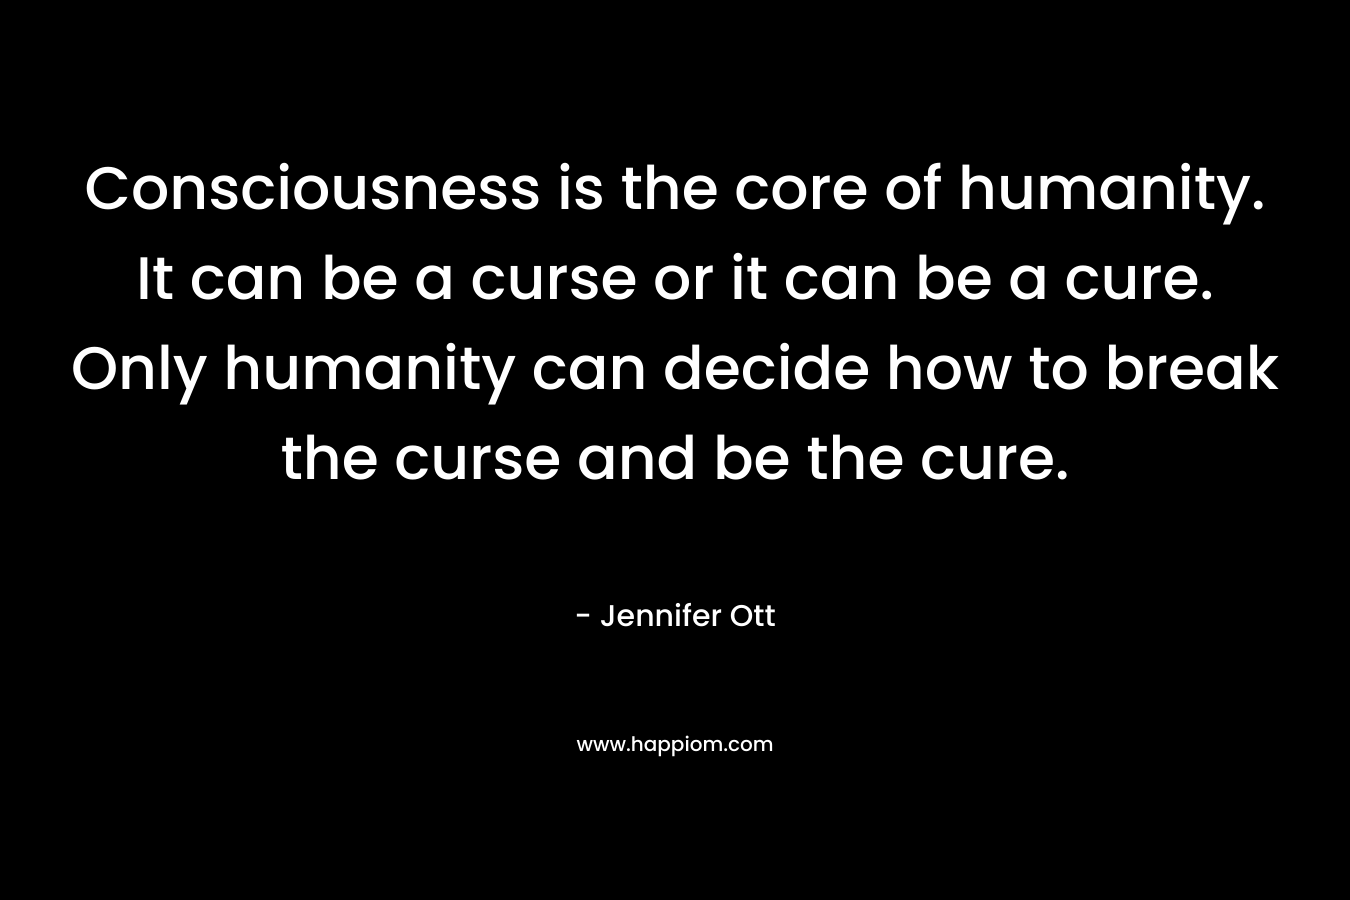 Consciousness is the core of humanity. It can be a curse or it can be a cure. Only humanity can decide how to break the curse and be the cure. – Jennifer Ott